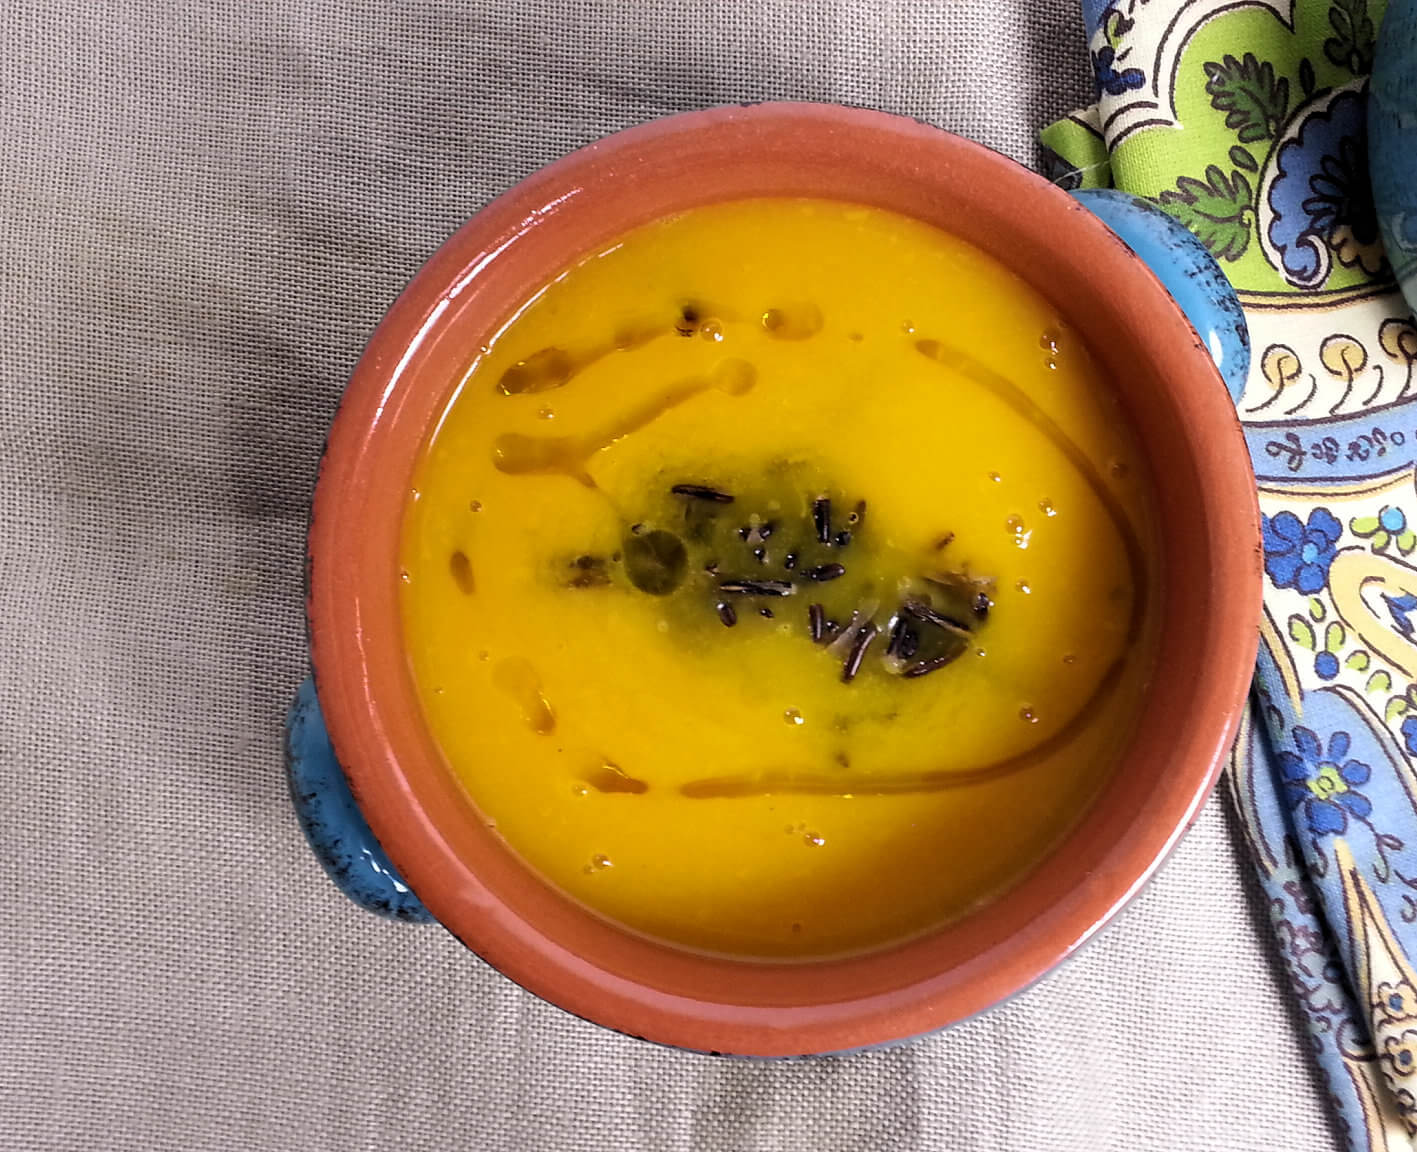 Picture of Orange and Yellow Pepper Soup, top down